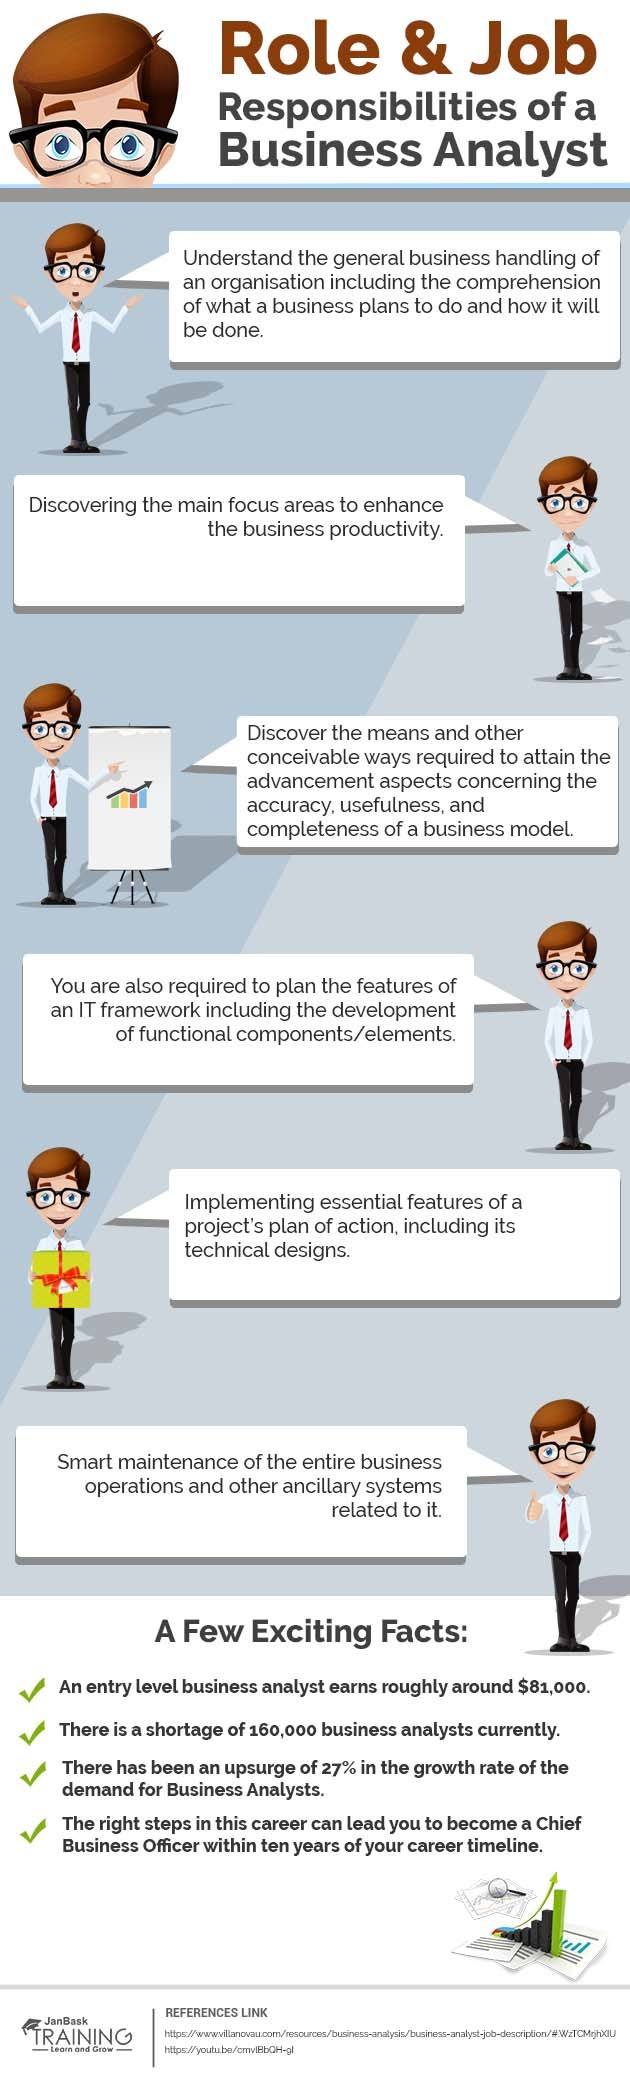 What Are The Role And Job Responsibilities Of A Business Analyst Infographic